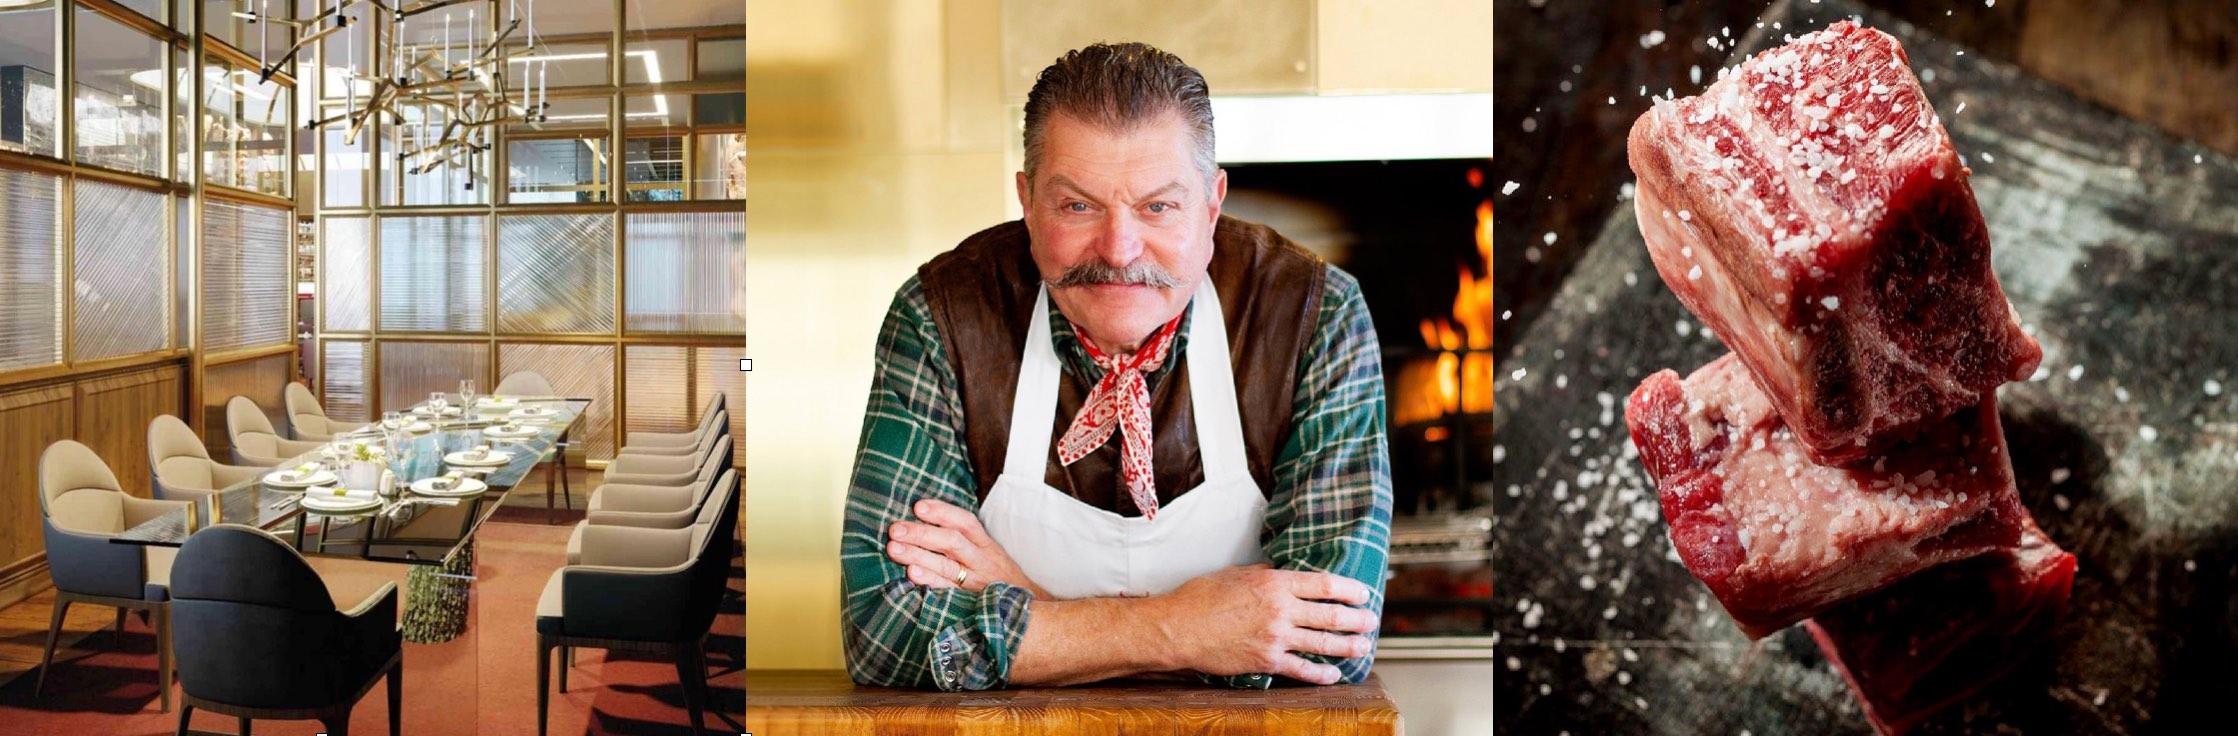 Dine with Dario Cecchini from Netflix's Chef's Table this weekend in Dubai